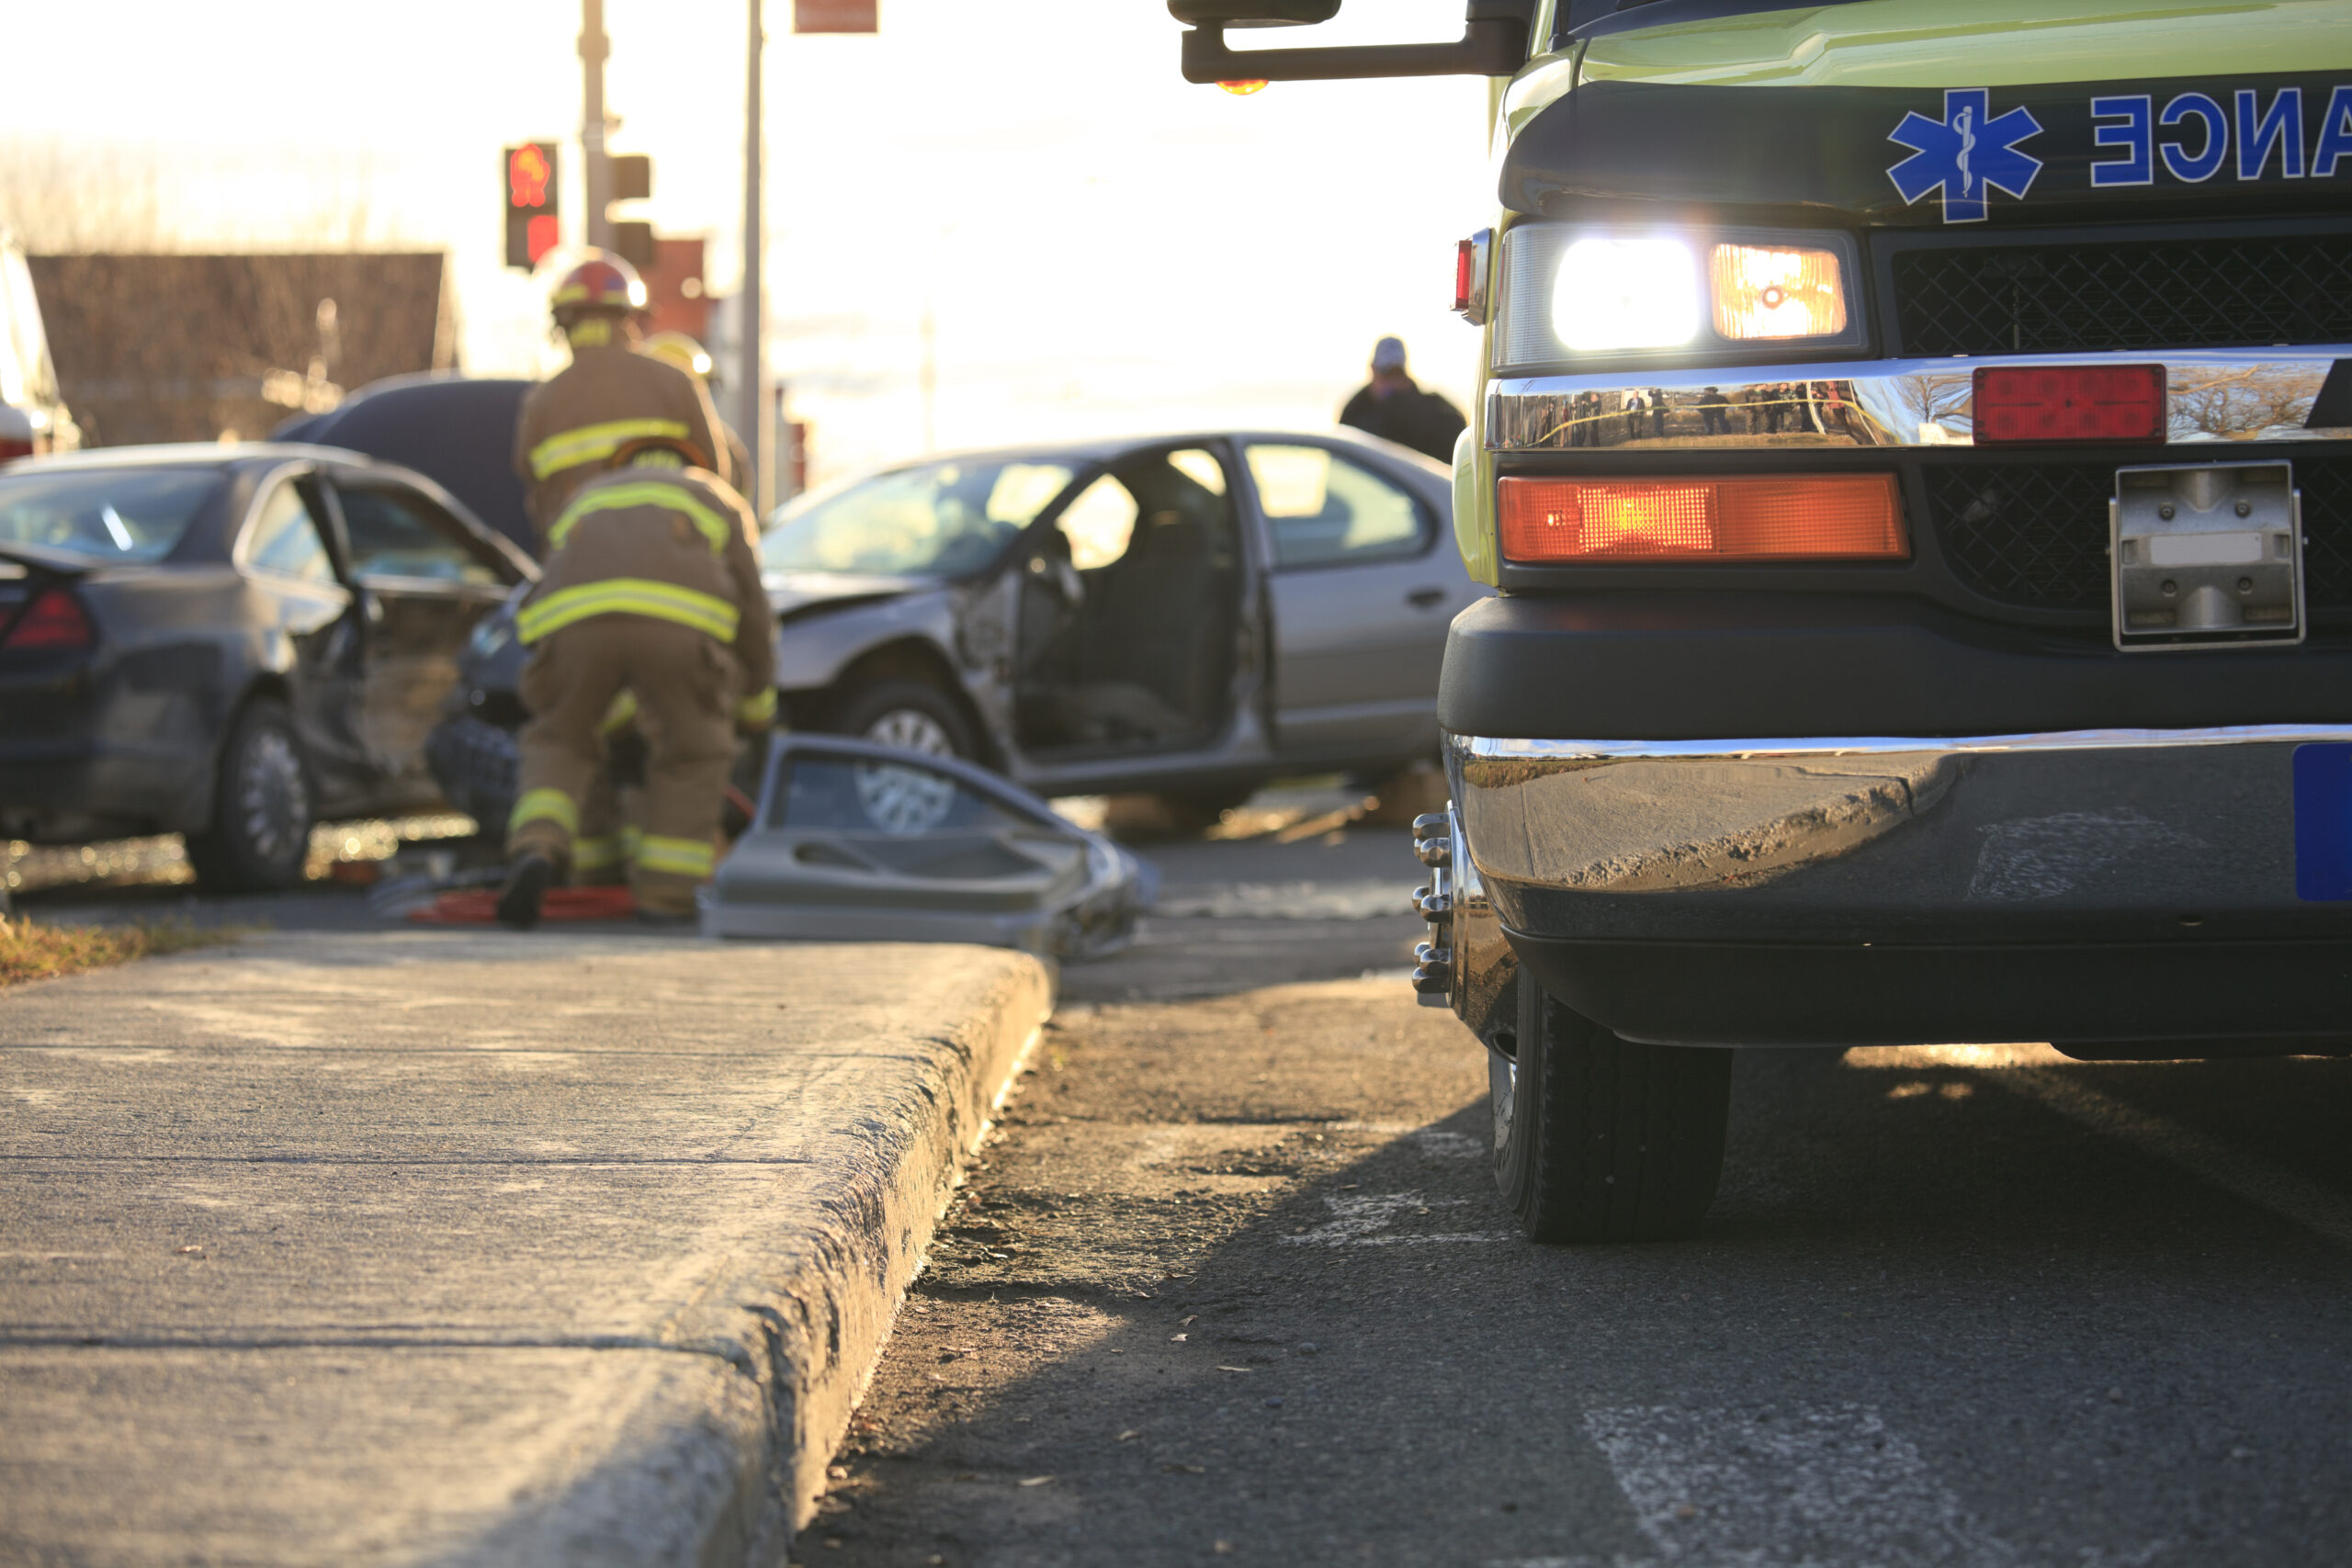 How to Deal with Insurance Adjusters After a Car Accident in Virginia